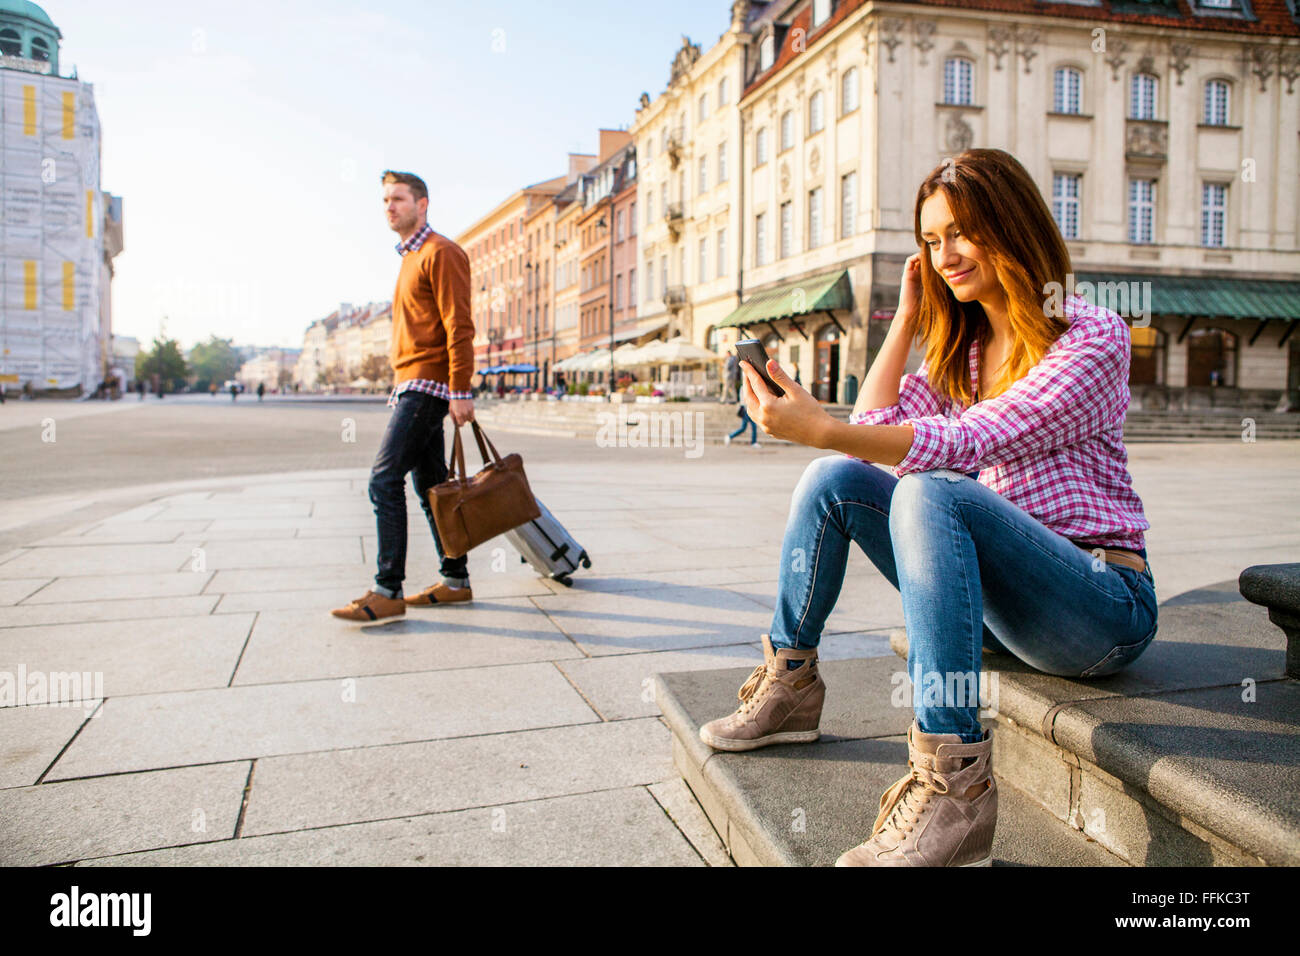 Mid adult woman using smart phone with man in background Stock Photo